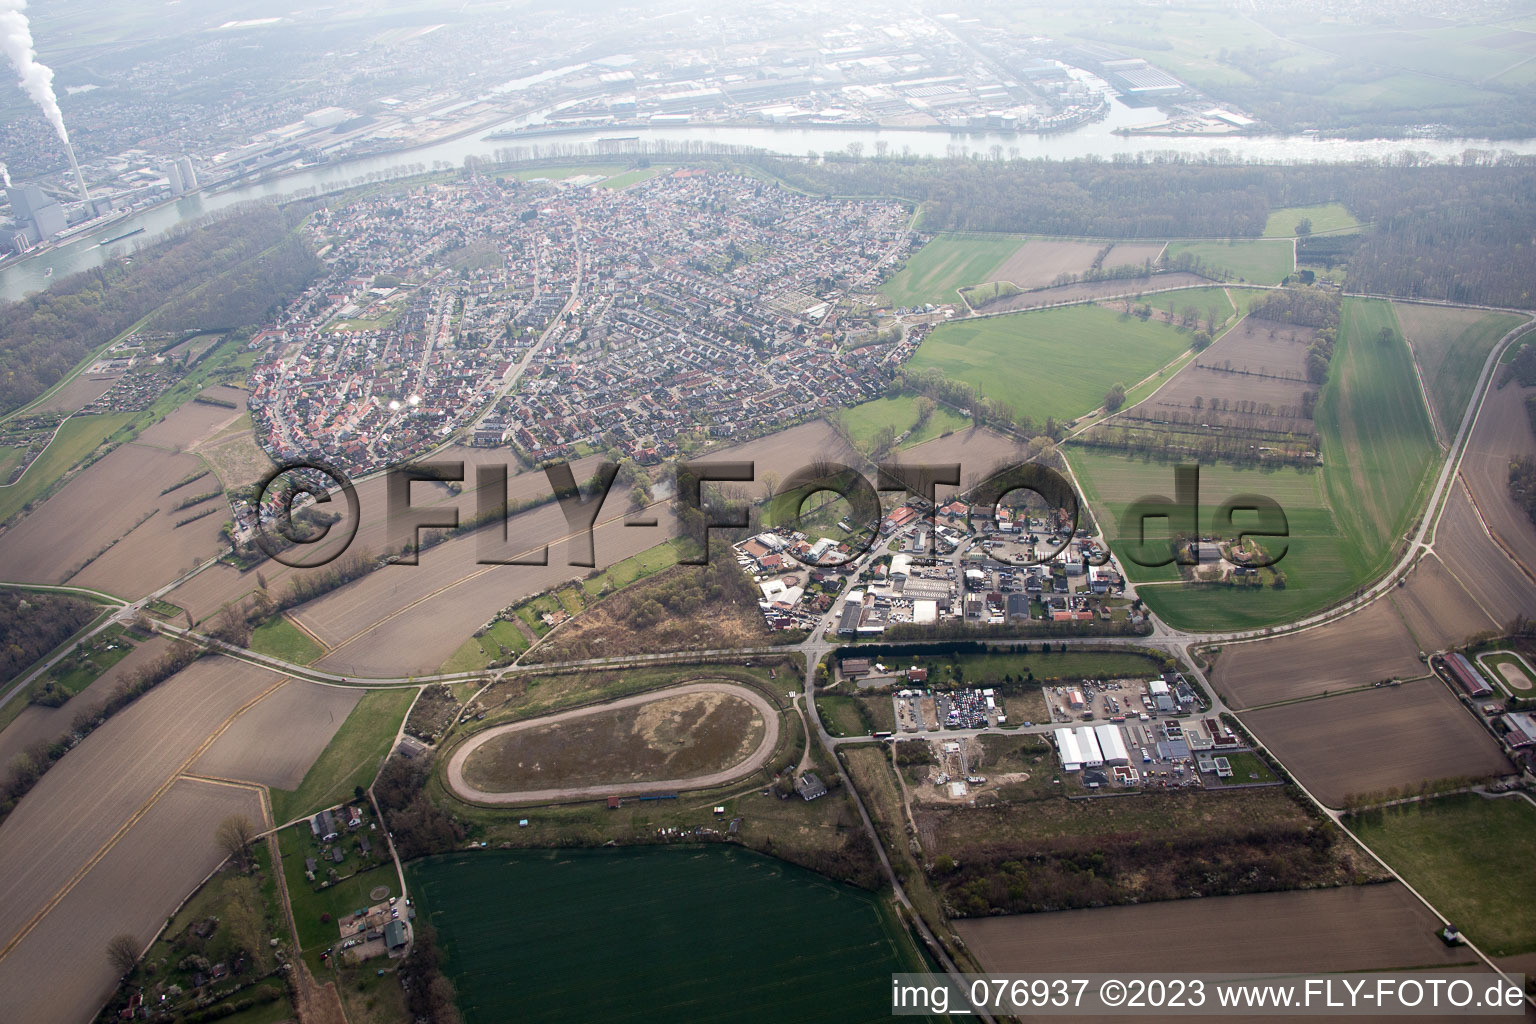 Altrip in the state Rhineland-Palatinate, Germany out of the air